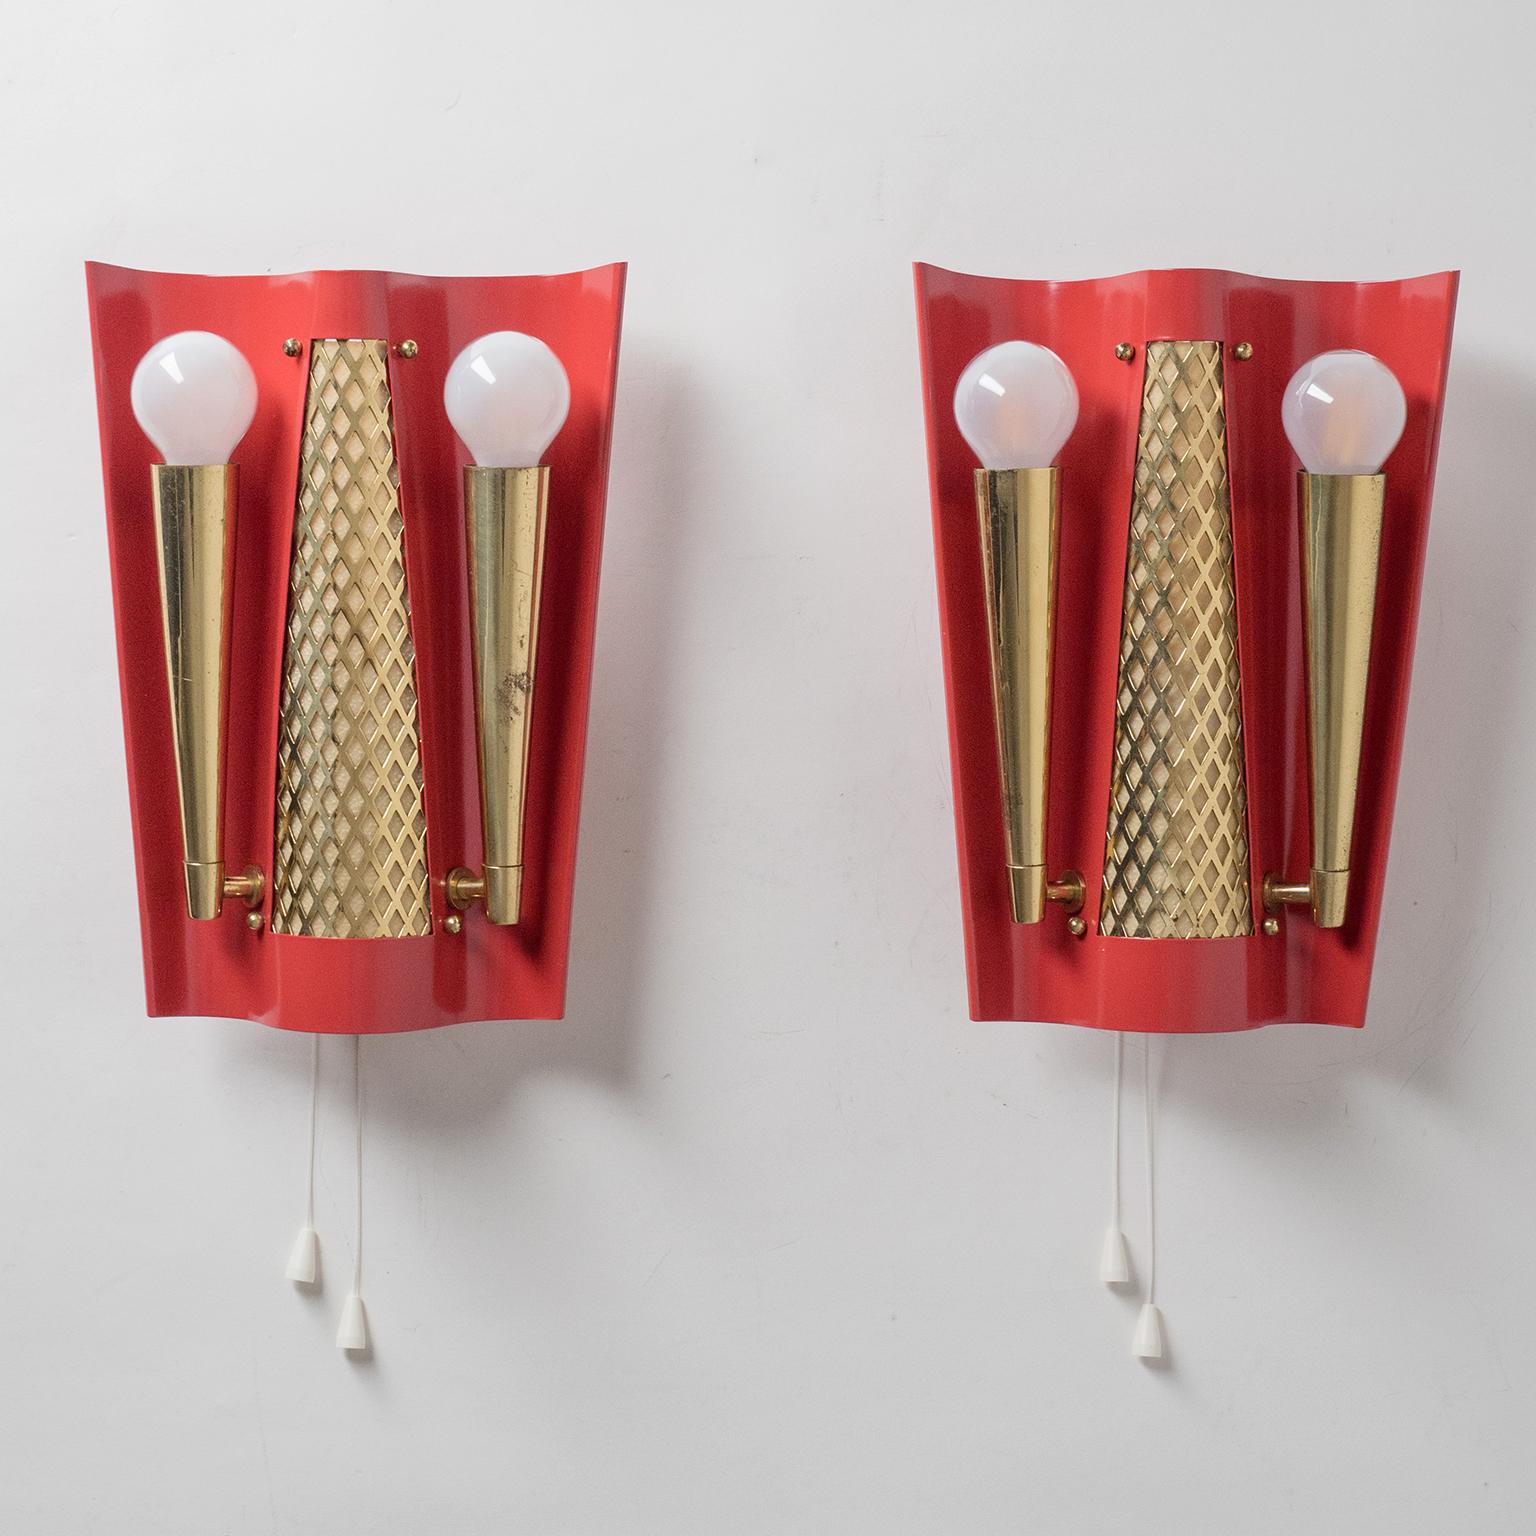 Rare pair of 'theatrical' wall lights, circa 1950. Curved steel backplate enameled in red with brass decorative elements and socket covers. Each unit has three original brass E14 sockets - two in the front and one on the back, which can be